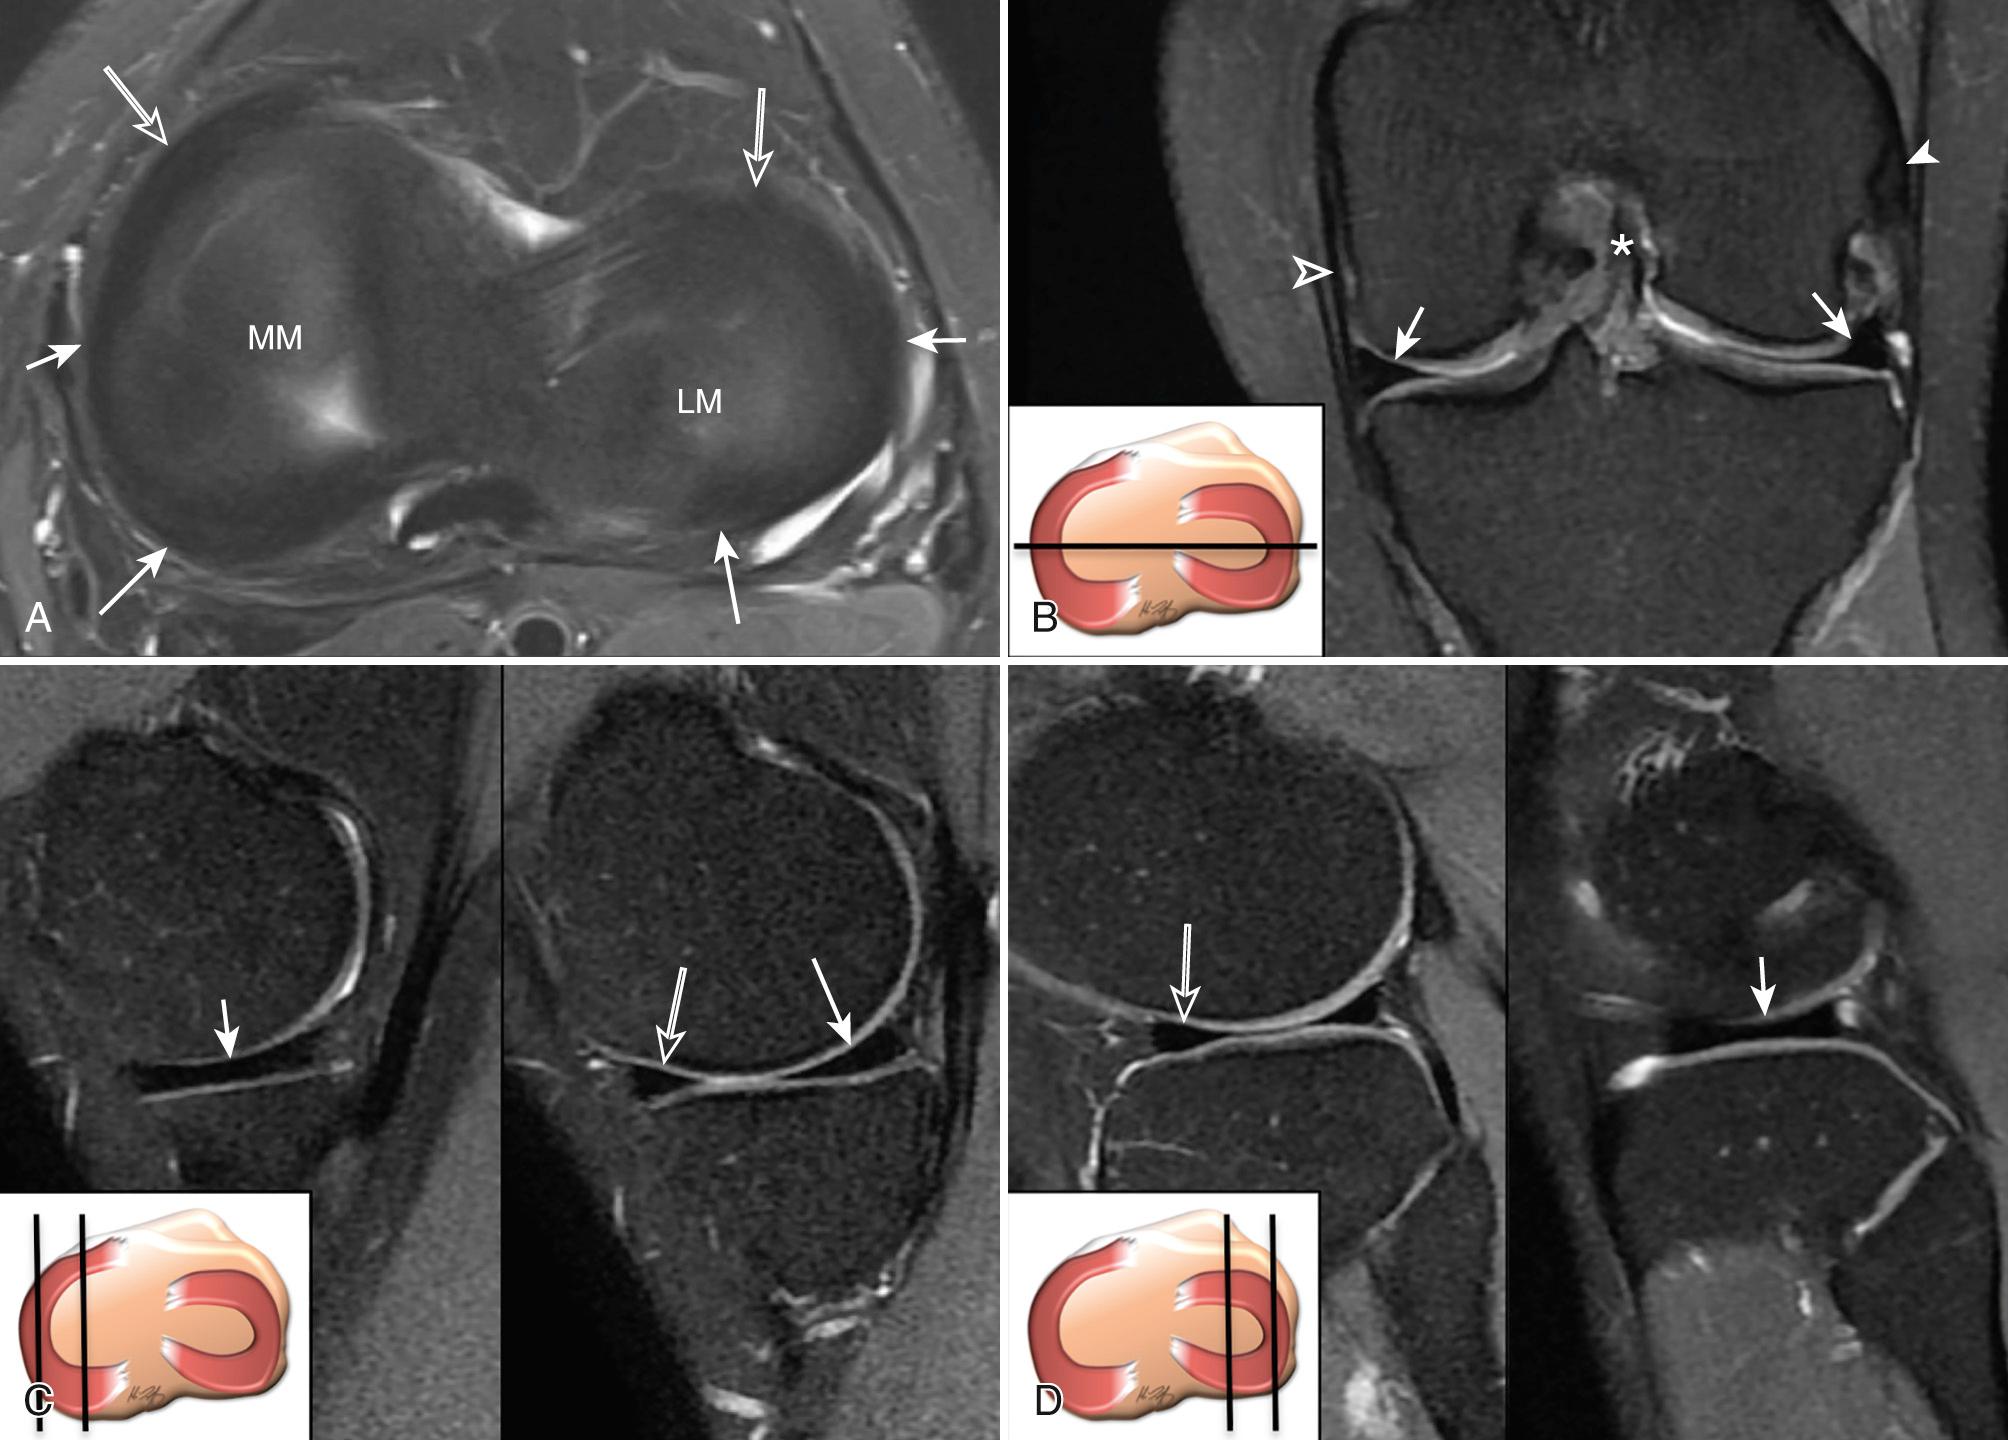 FIG 7.2, Axial (A), coronal (B), and sagittal (C and D) proton density (PD) fat-saturated (FS) MR images show the normal MR anatomy of the lateral and medial meniscus. Normal semilunar morphology of the menisci is observed on the axial MR image (A). The medial meniscus (MM) has a more open C-shape configuration than the lateral meniscus (LM). Each meniscus is divided in three portions: anterior horn (open arrows) , body (thick arrows) , and posterior horn (thin arrows) . The body of the medial and lateral meniscus (thick arrows) appears as a wedged, hypointense structure on coronal MR images (B), whereas the anterior (open arrows) and posterior (thin arrows) horns of the medial (C) and lateral (D) meniscus have a wedged configuration on sagittal MR images. The body of the menisci take on a more bow tie configuration when imaged parallel to its longitudinal axis ( thick arrows in C and D). Open arrowhead indicates the medial collateral ligament; white arrowhead indicates lateral collateral ligament.